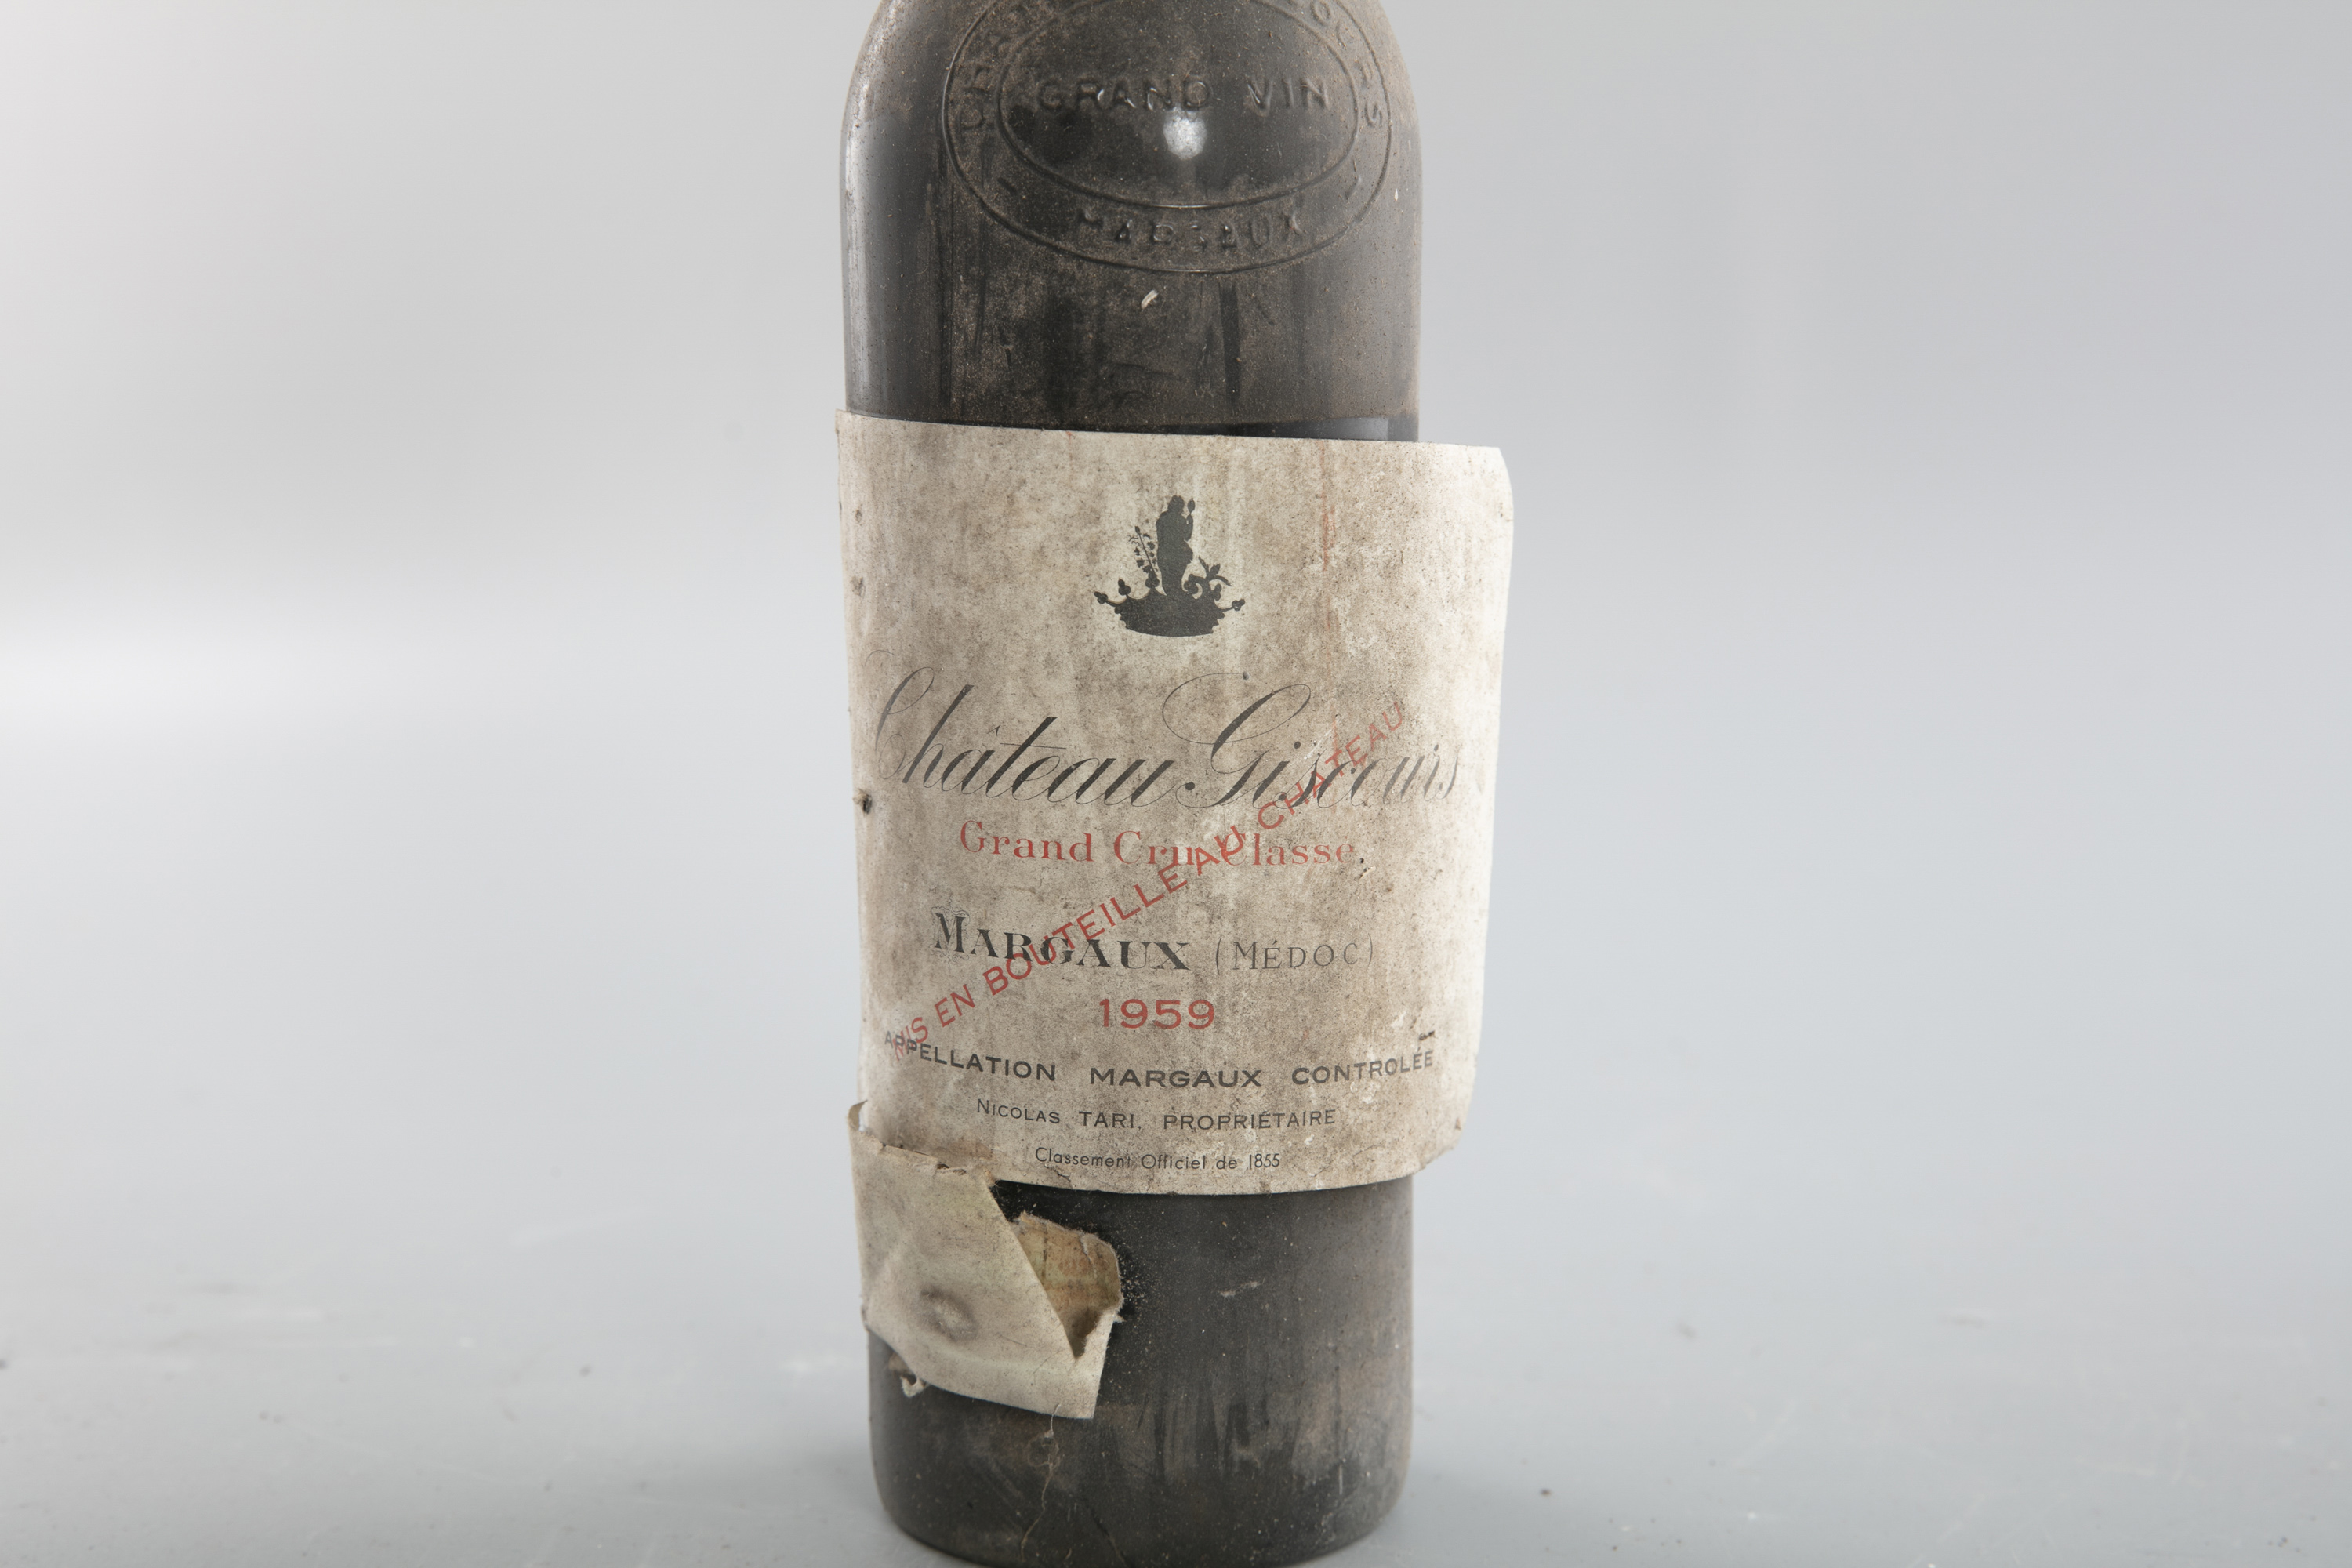 CHATEAUX GISCOURS Margaux 1959 Four bottles Worn label, fair capsules, high shoulder From the Cellar - Image 10 of 12